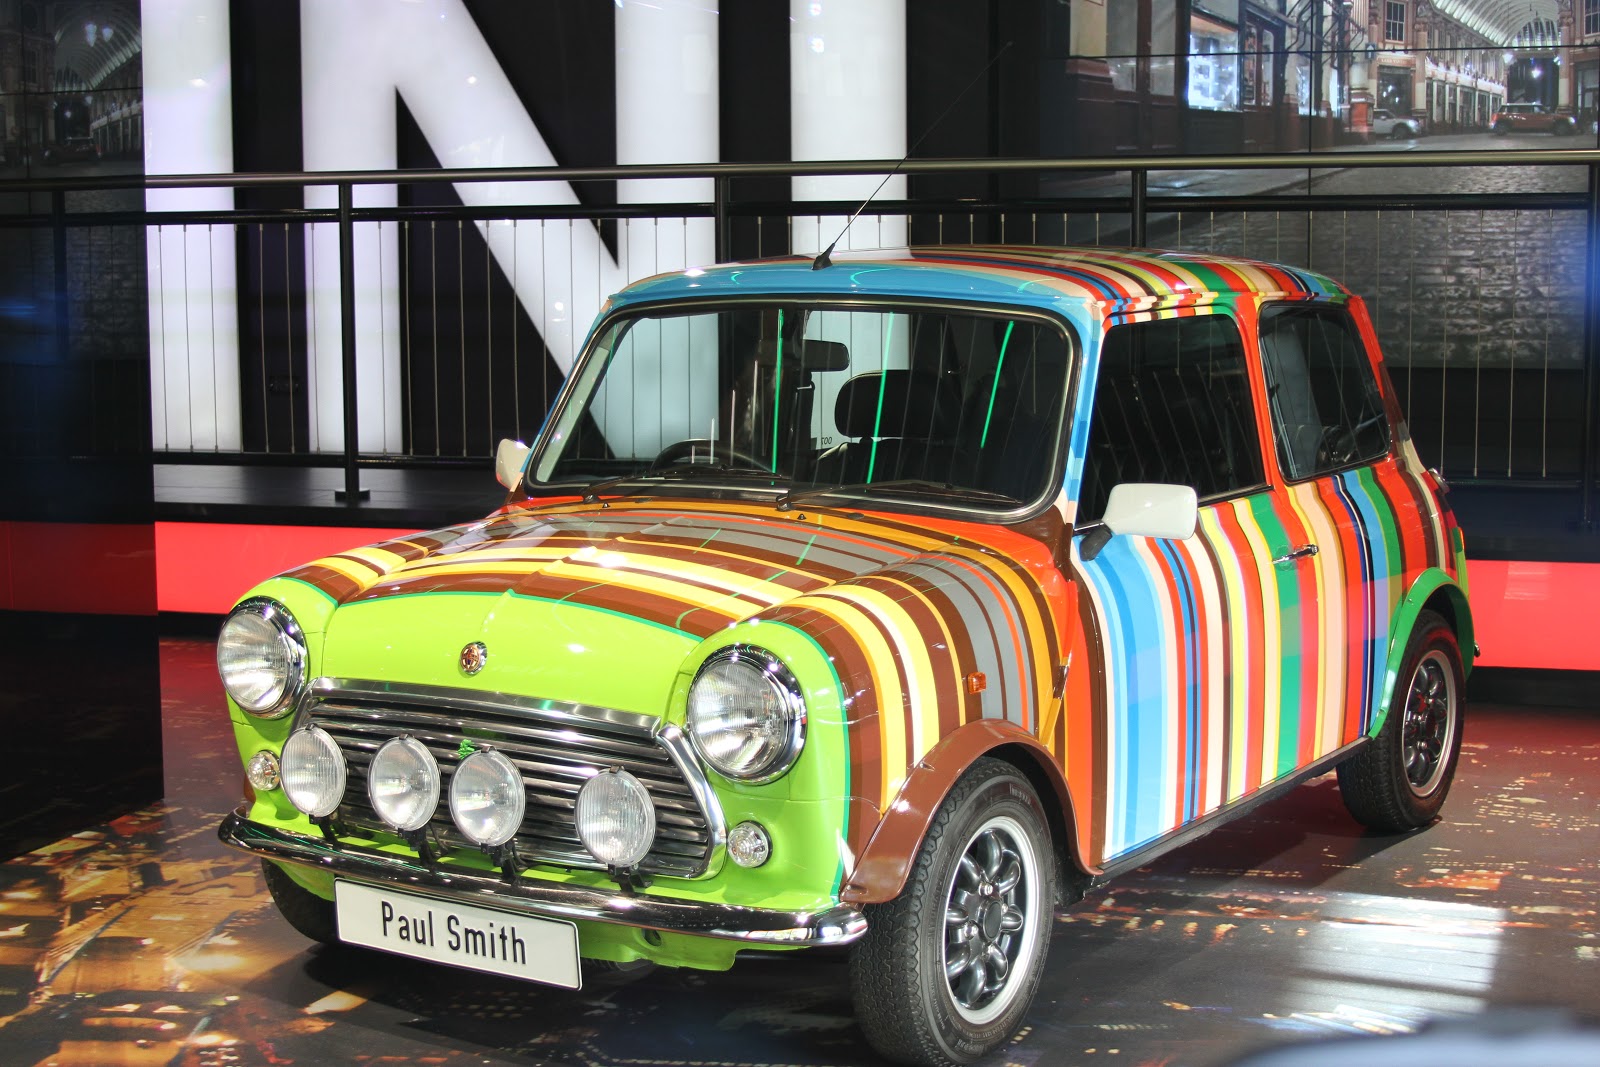 EUROPEAN RELOCATION: COOL CARS SEEN IN LONDON